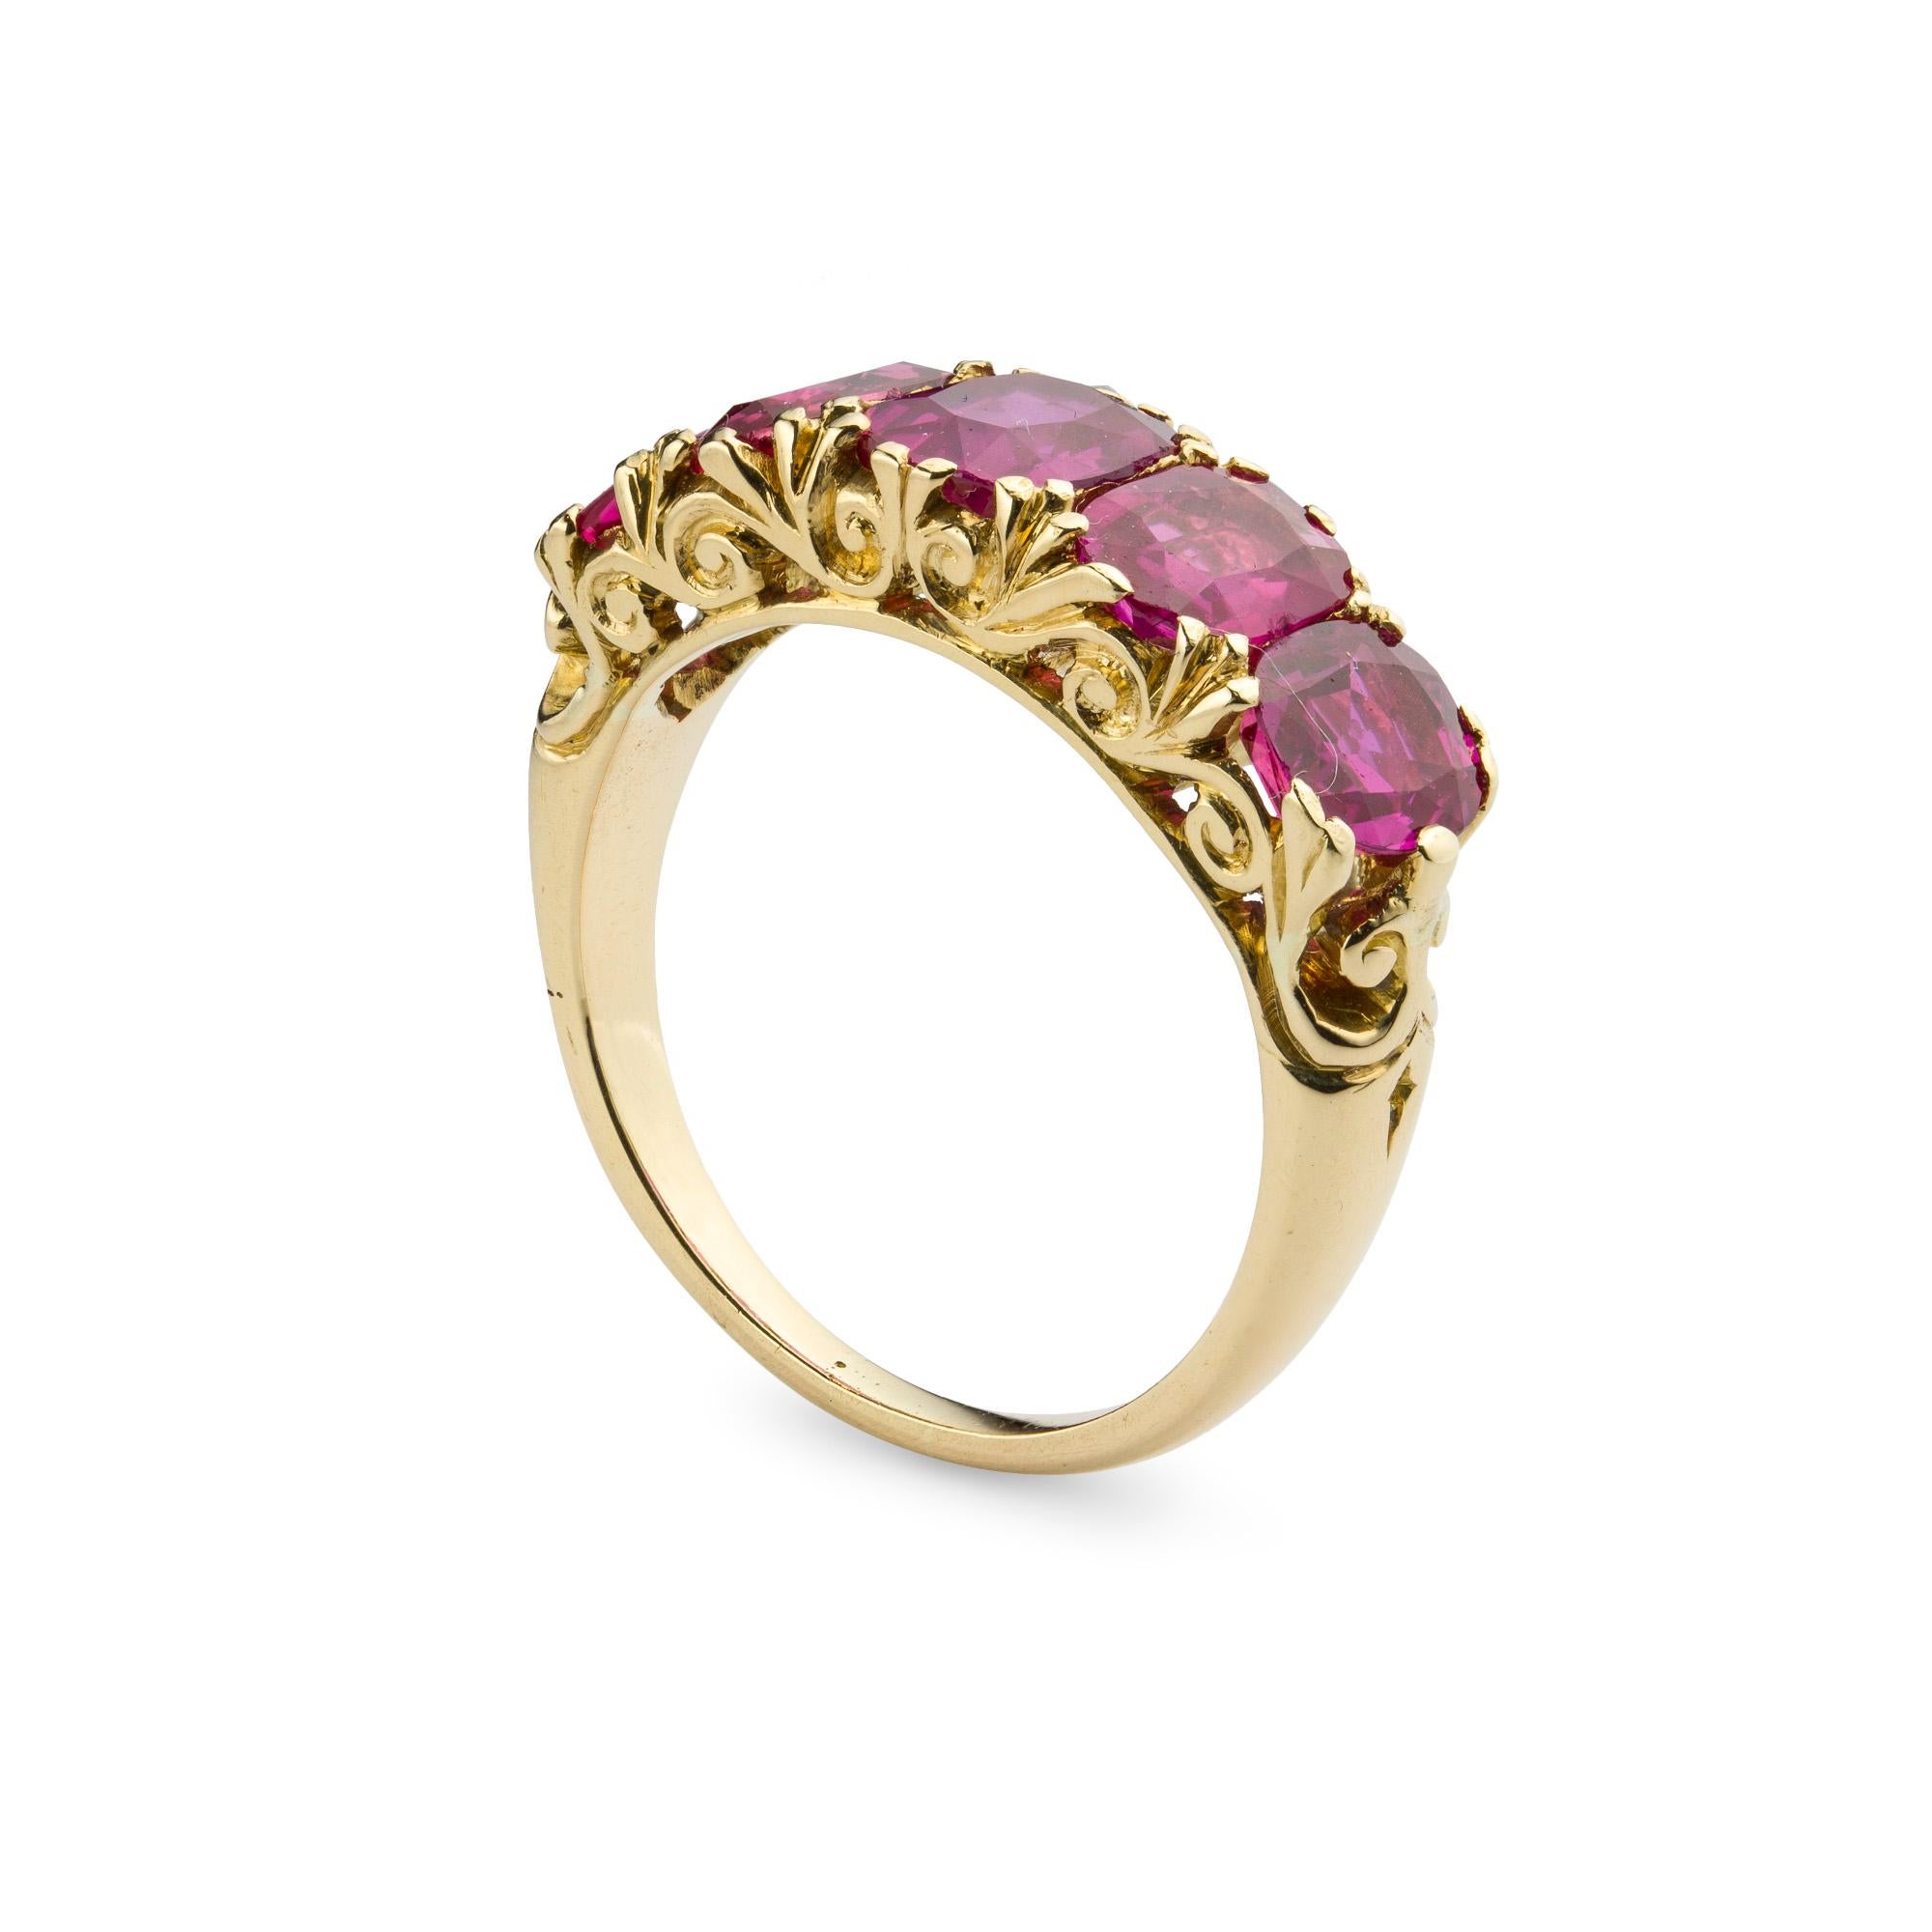 A Victorian five stone Burmese ruby ring, consisting of five cushion-cut rubies graduating from the centre and estimated to weigh 4.5 carats in total, accompanied by GCS Report 81278-24 stating to be of Burmese origin with no indication of heating,